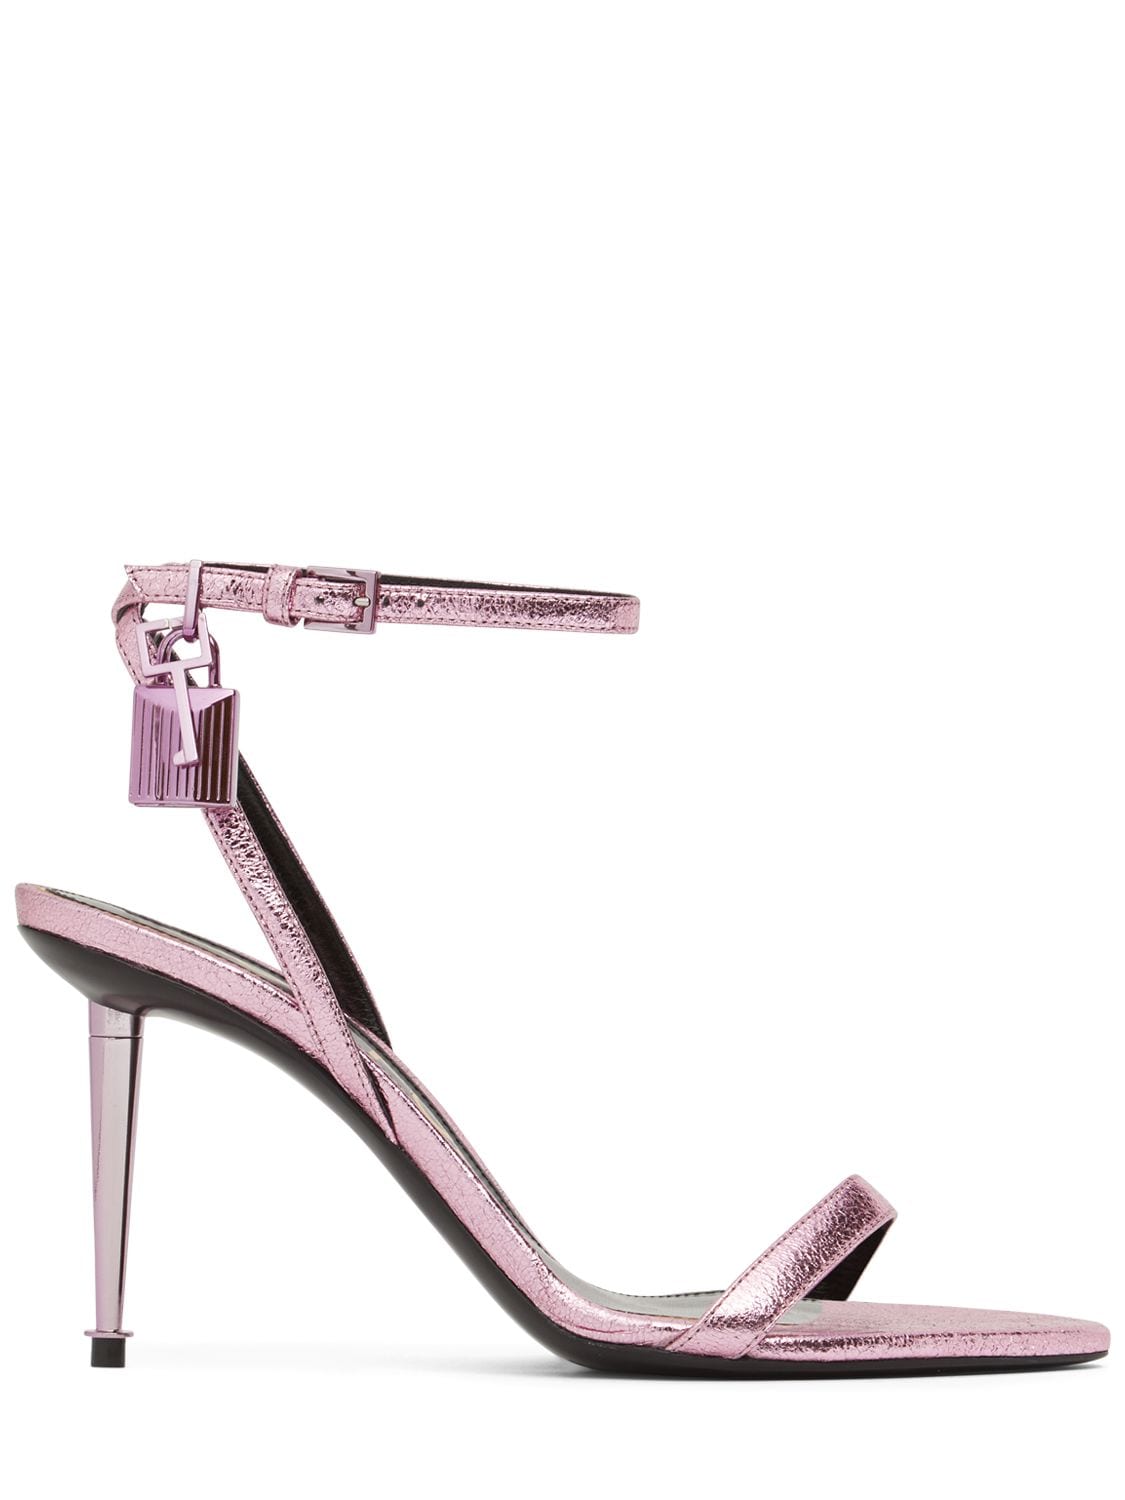 TOM FORD 85mm Padlock Laminated Leather Sandals